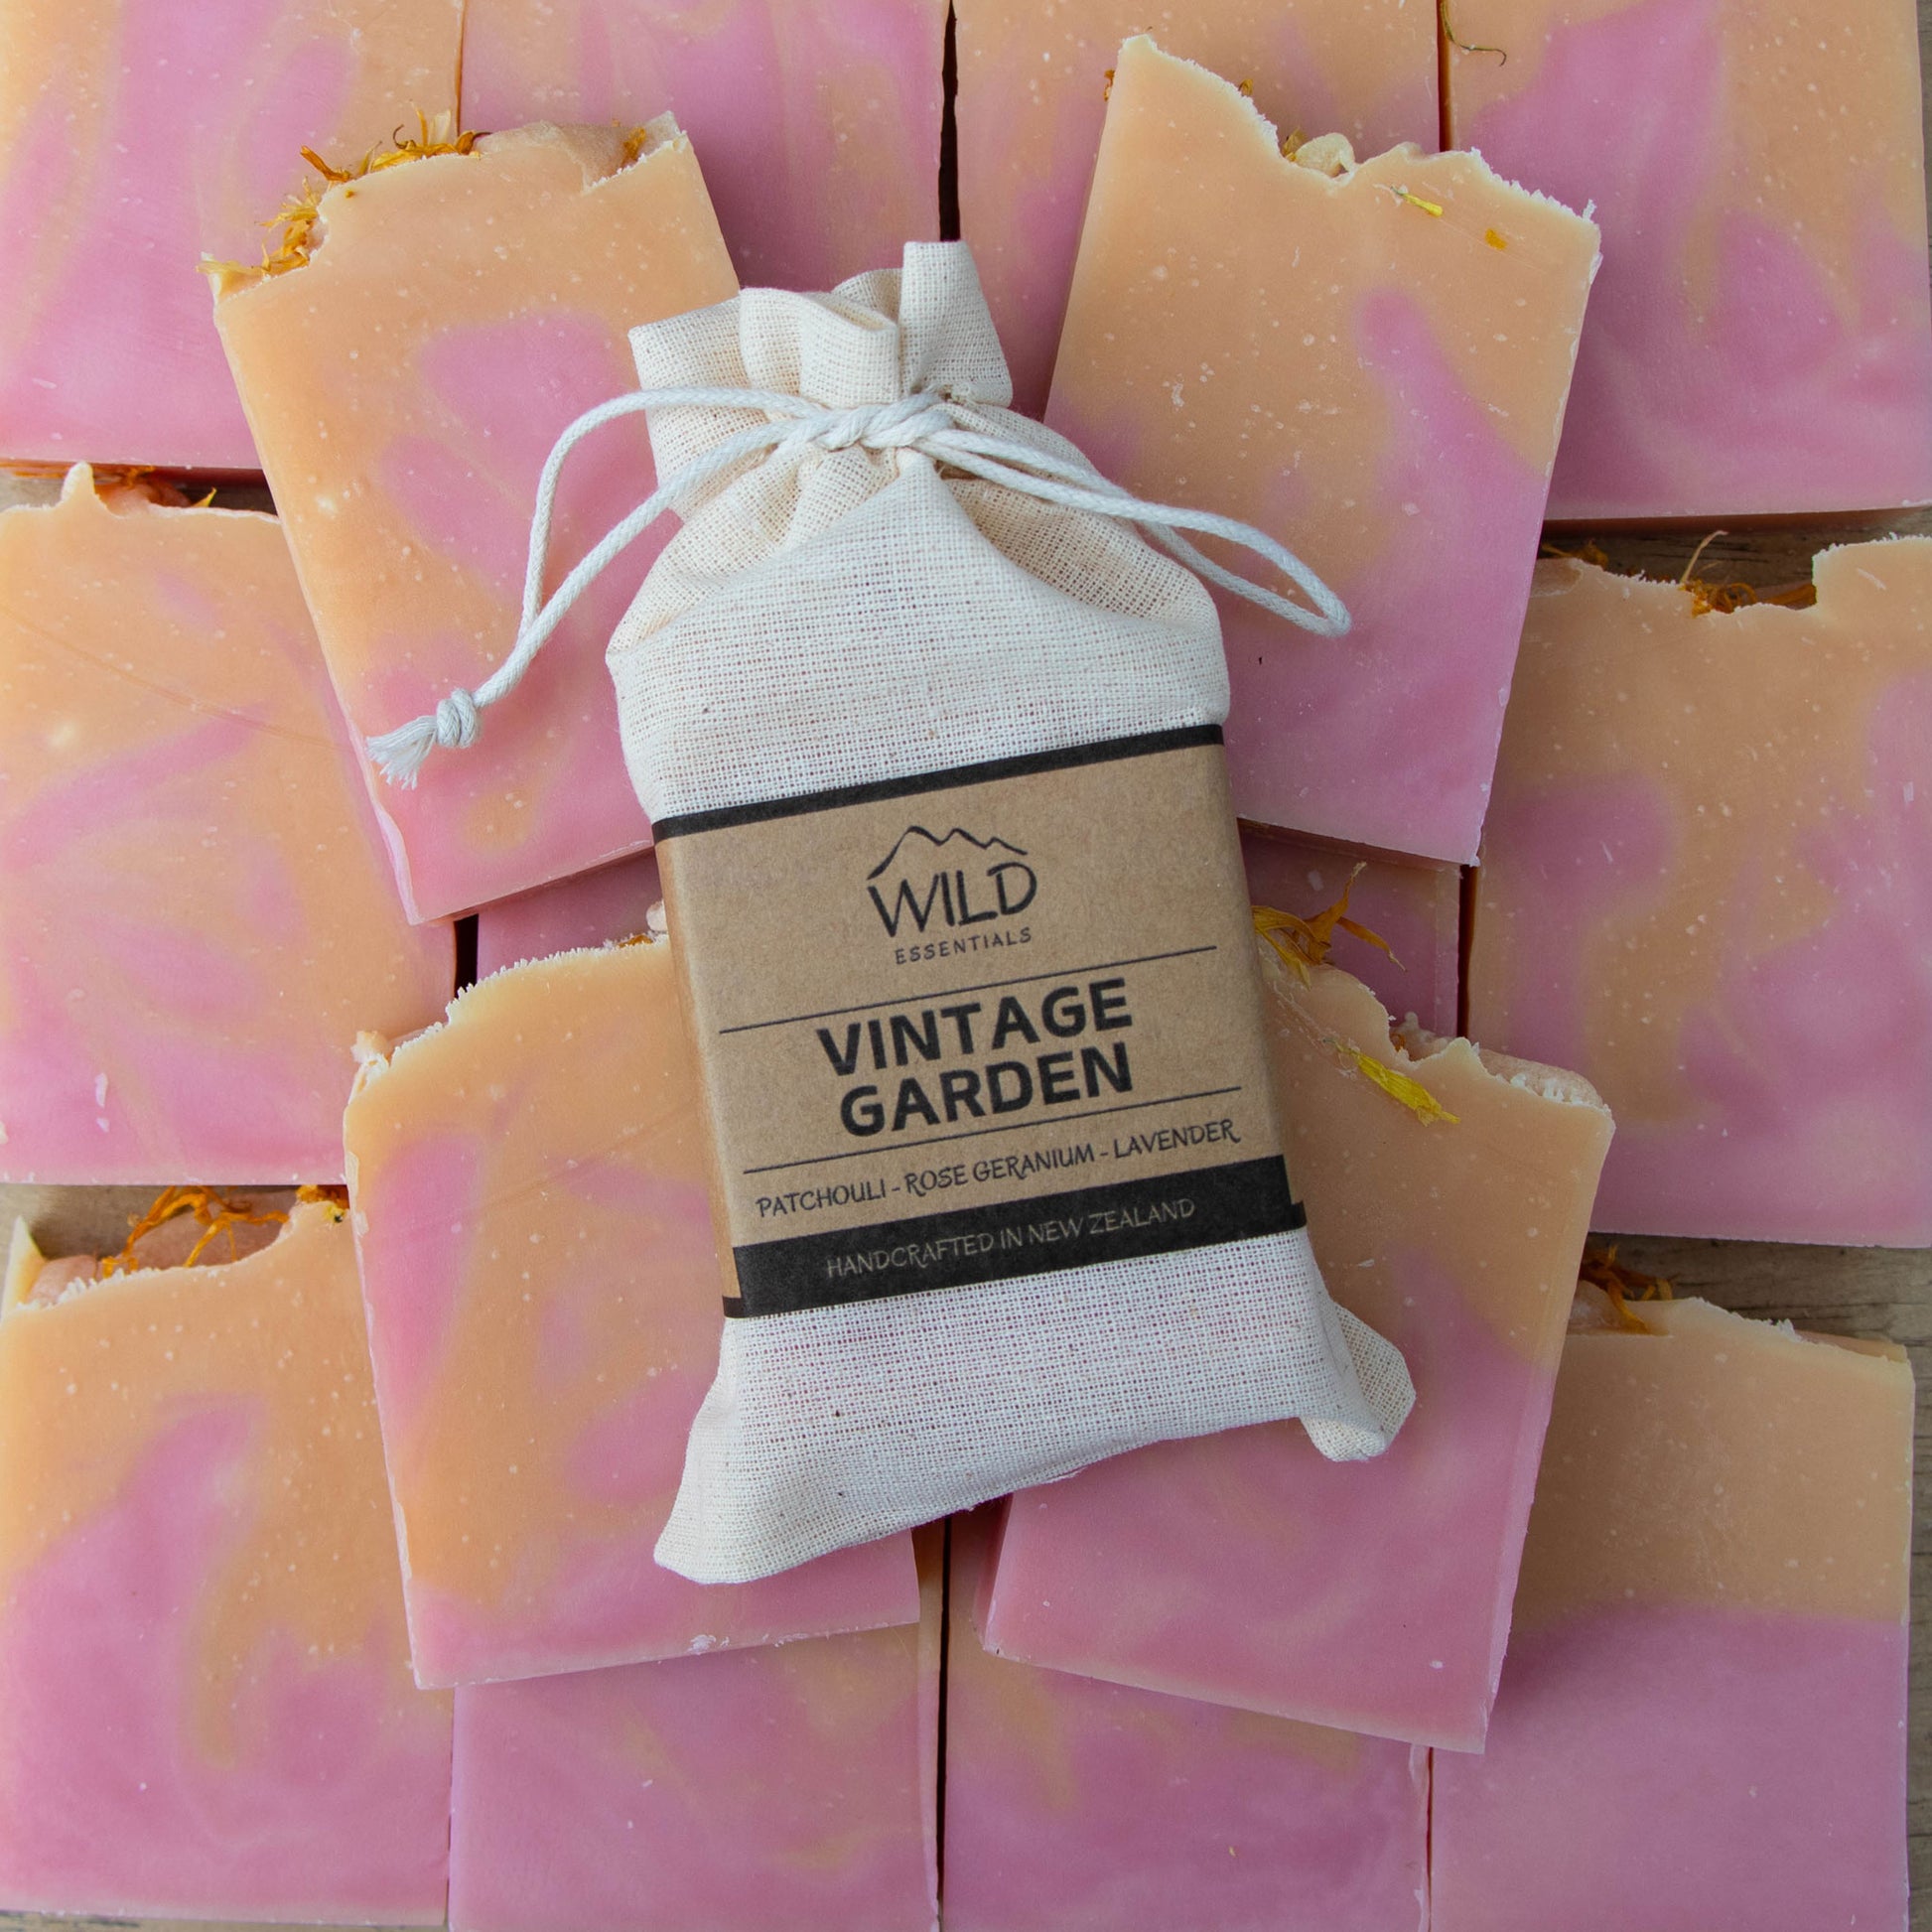 Photo of the Vintage Garden Bar Soap handcrafted by Wild Essentials